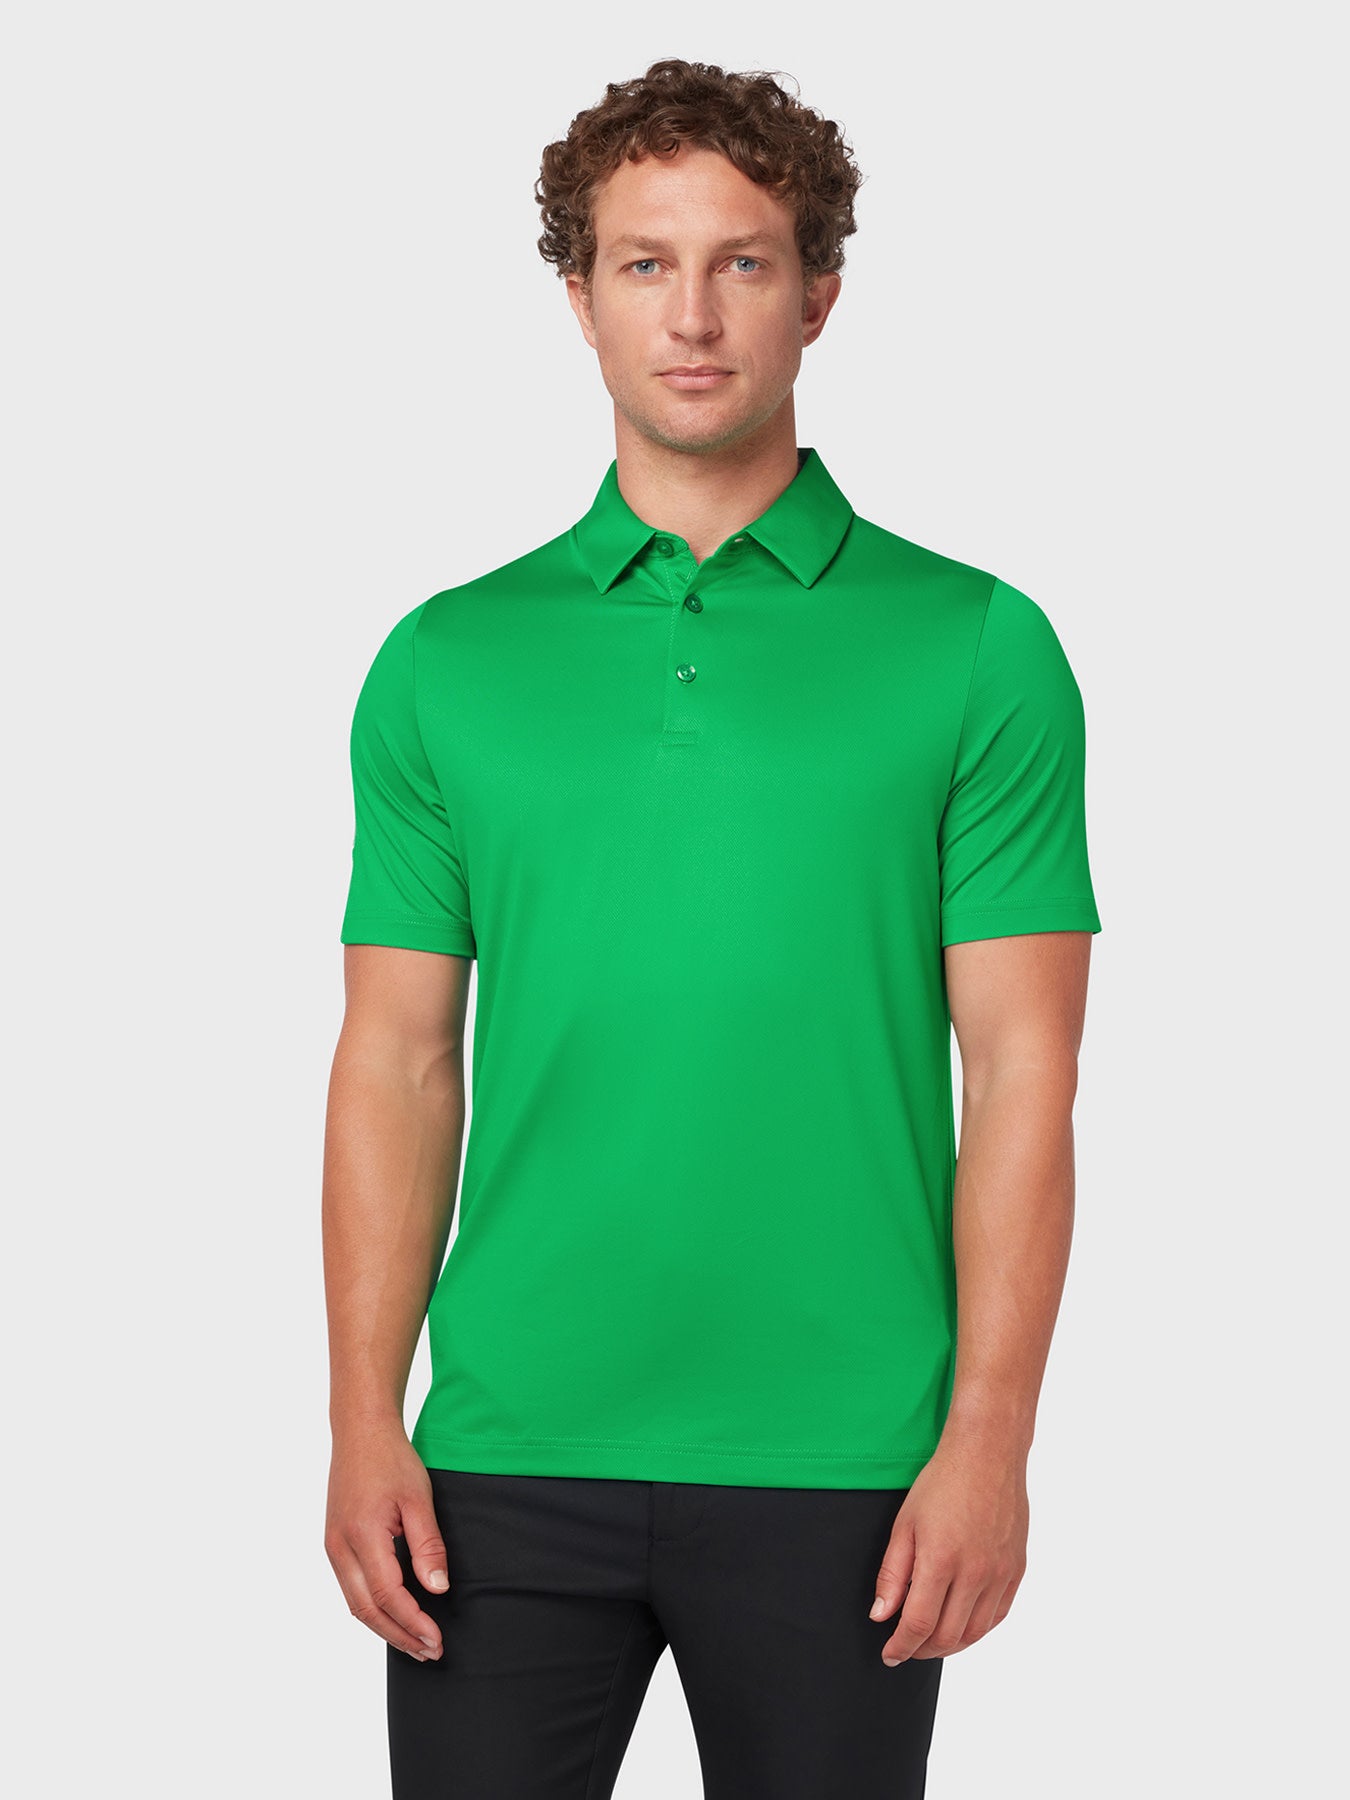 View Swing Tech Tour Polo In Golf Green Golf Green M information